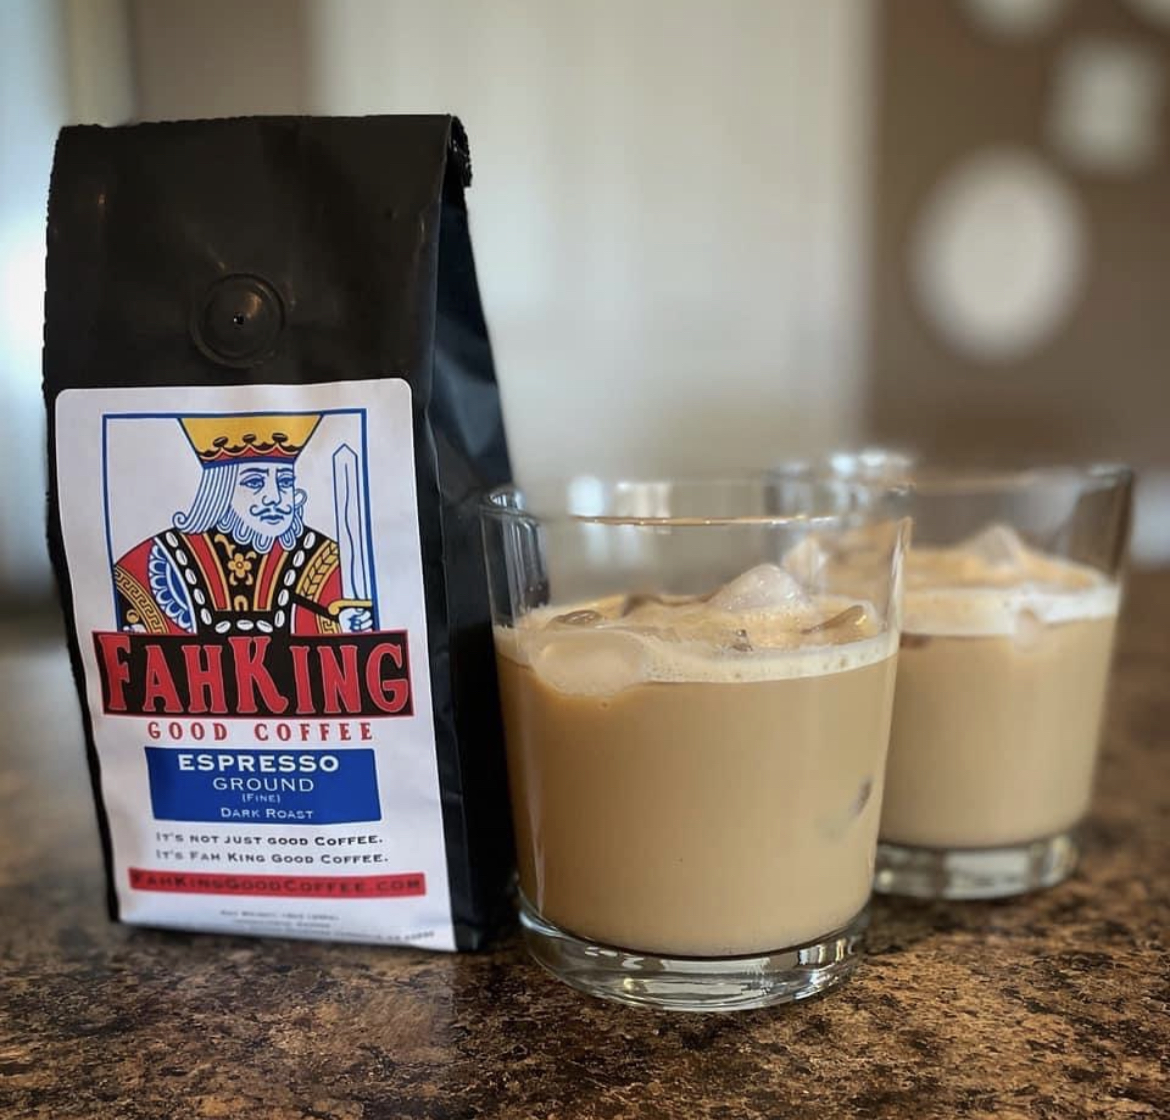 Treat yourself to an afternoon snack. You Fah King deserve it! 💪👑☕ #fahkinggoodcoffee #coffee #sunday